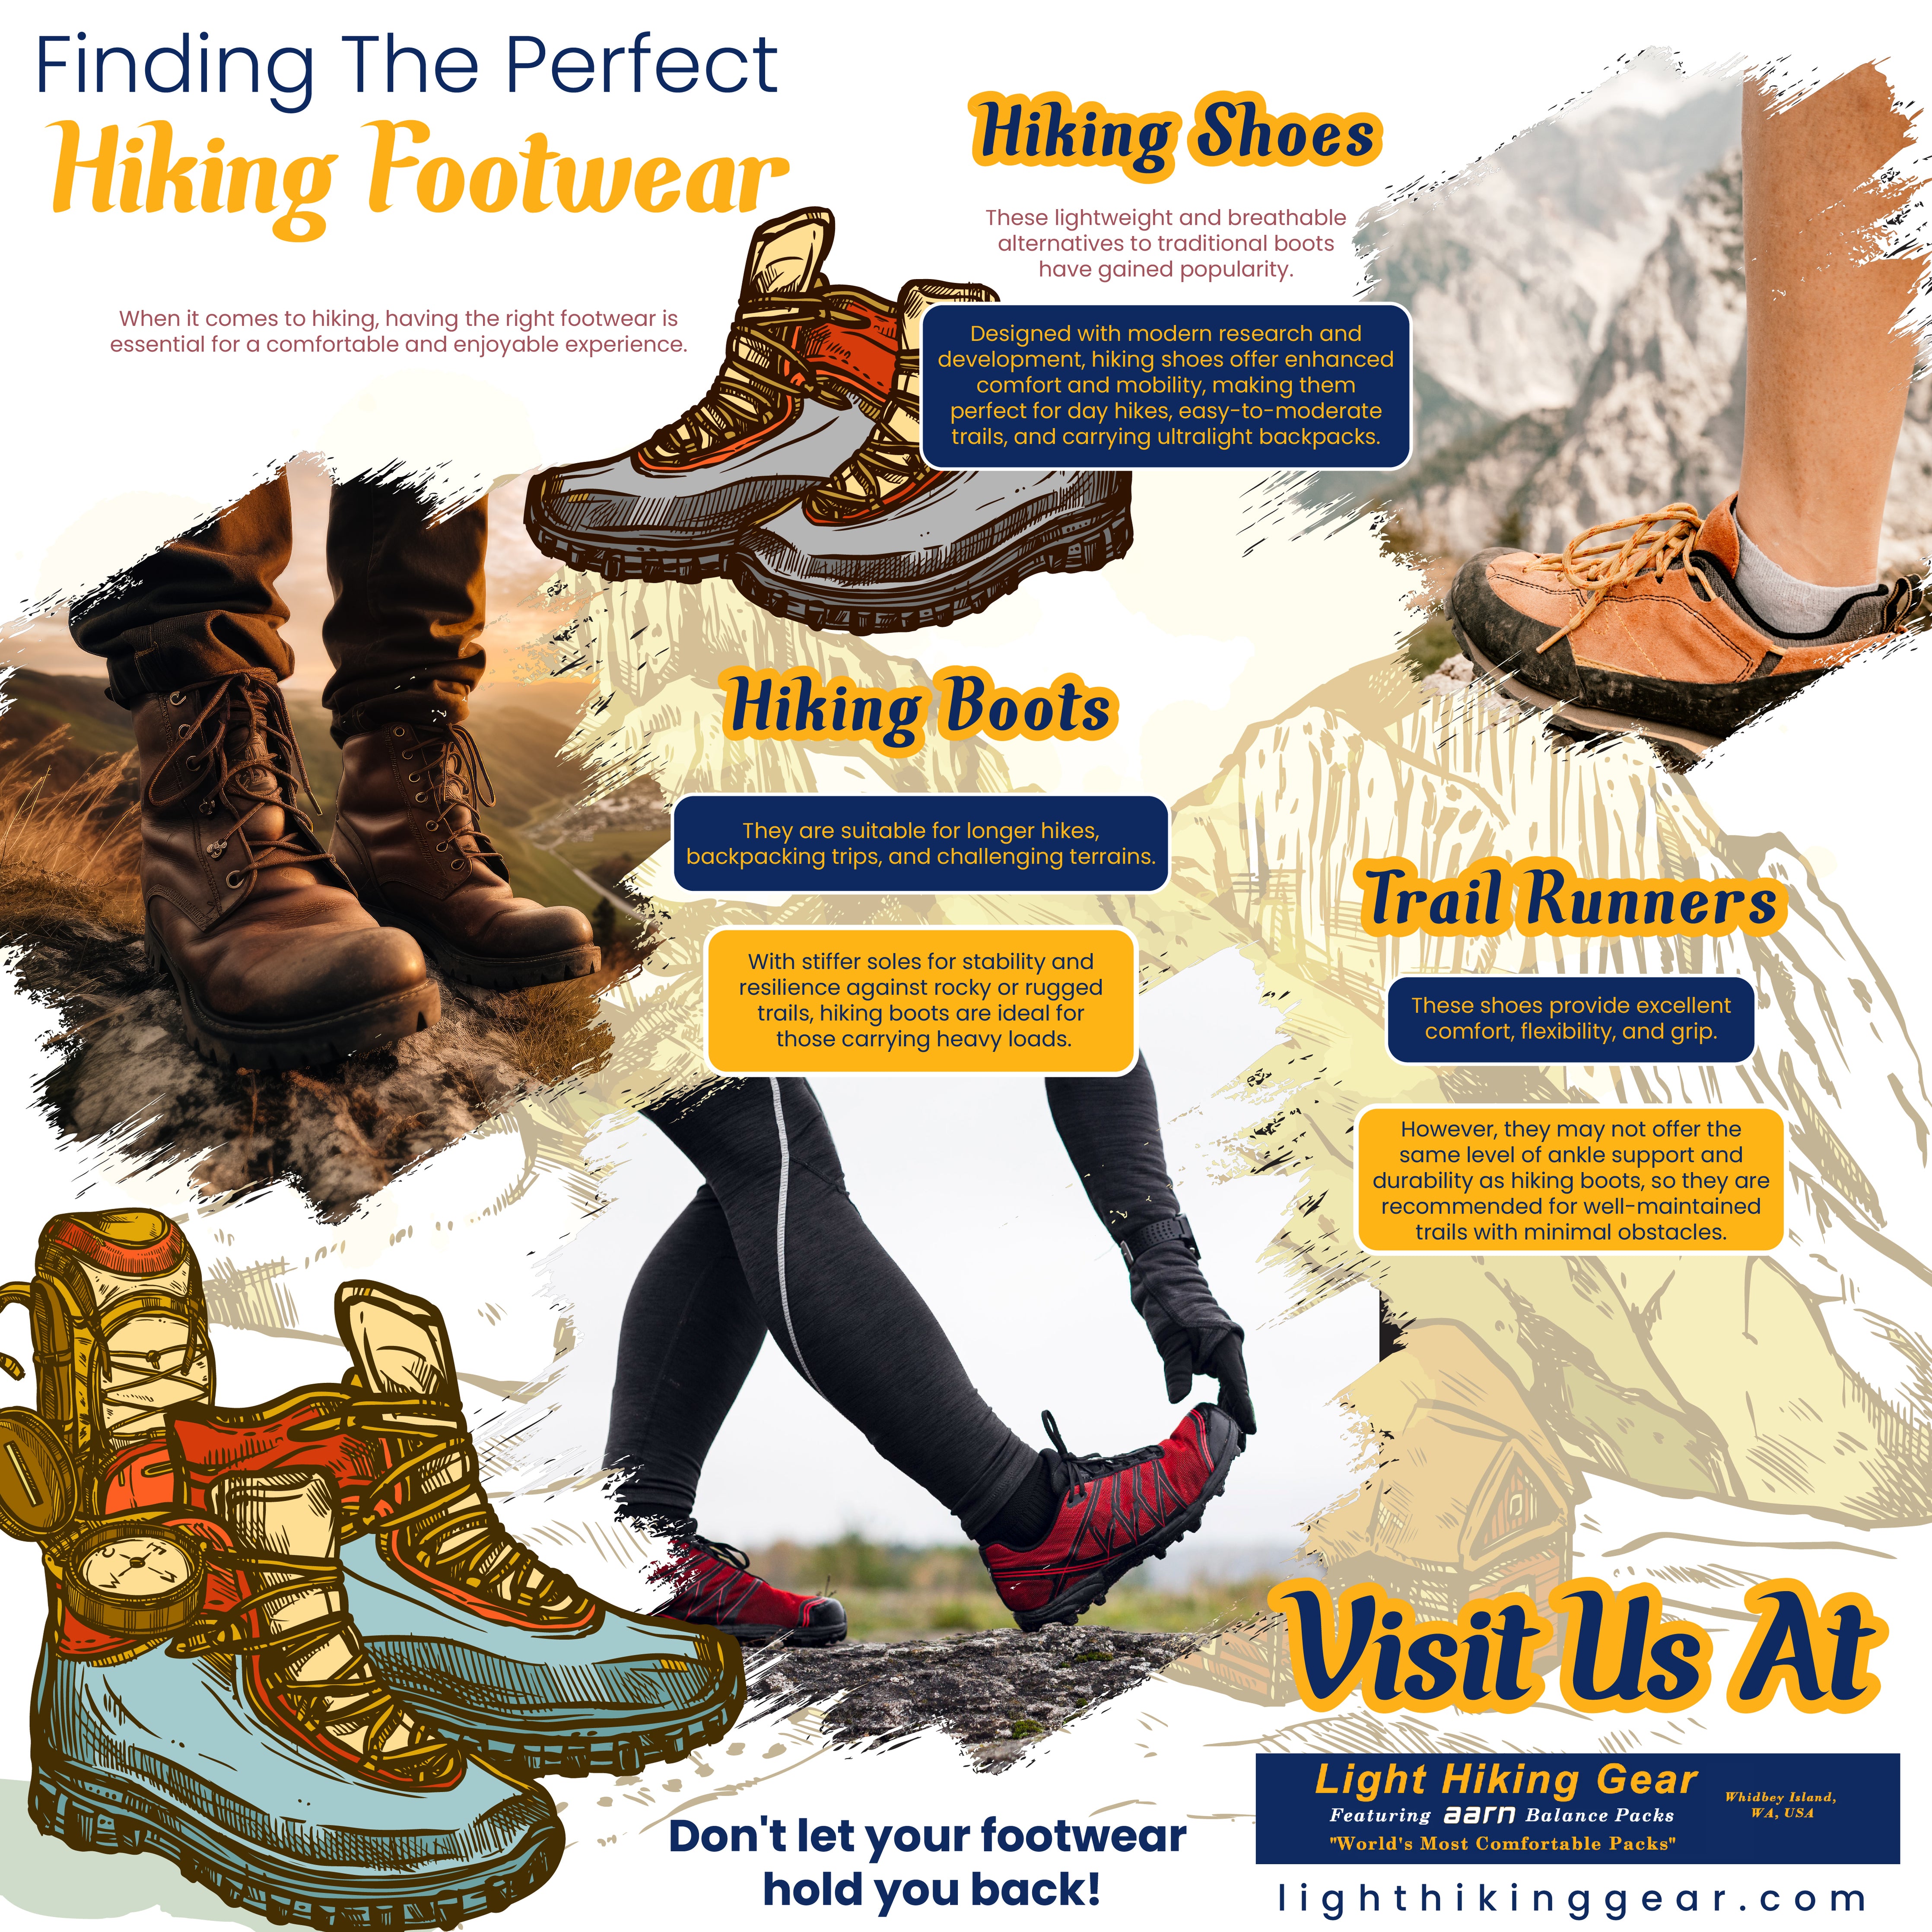 Finding the Perfect Hiking Footwear